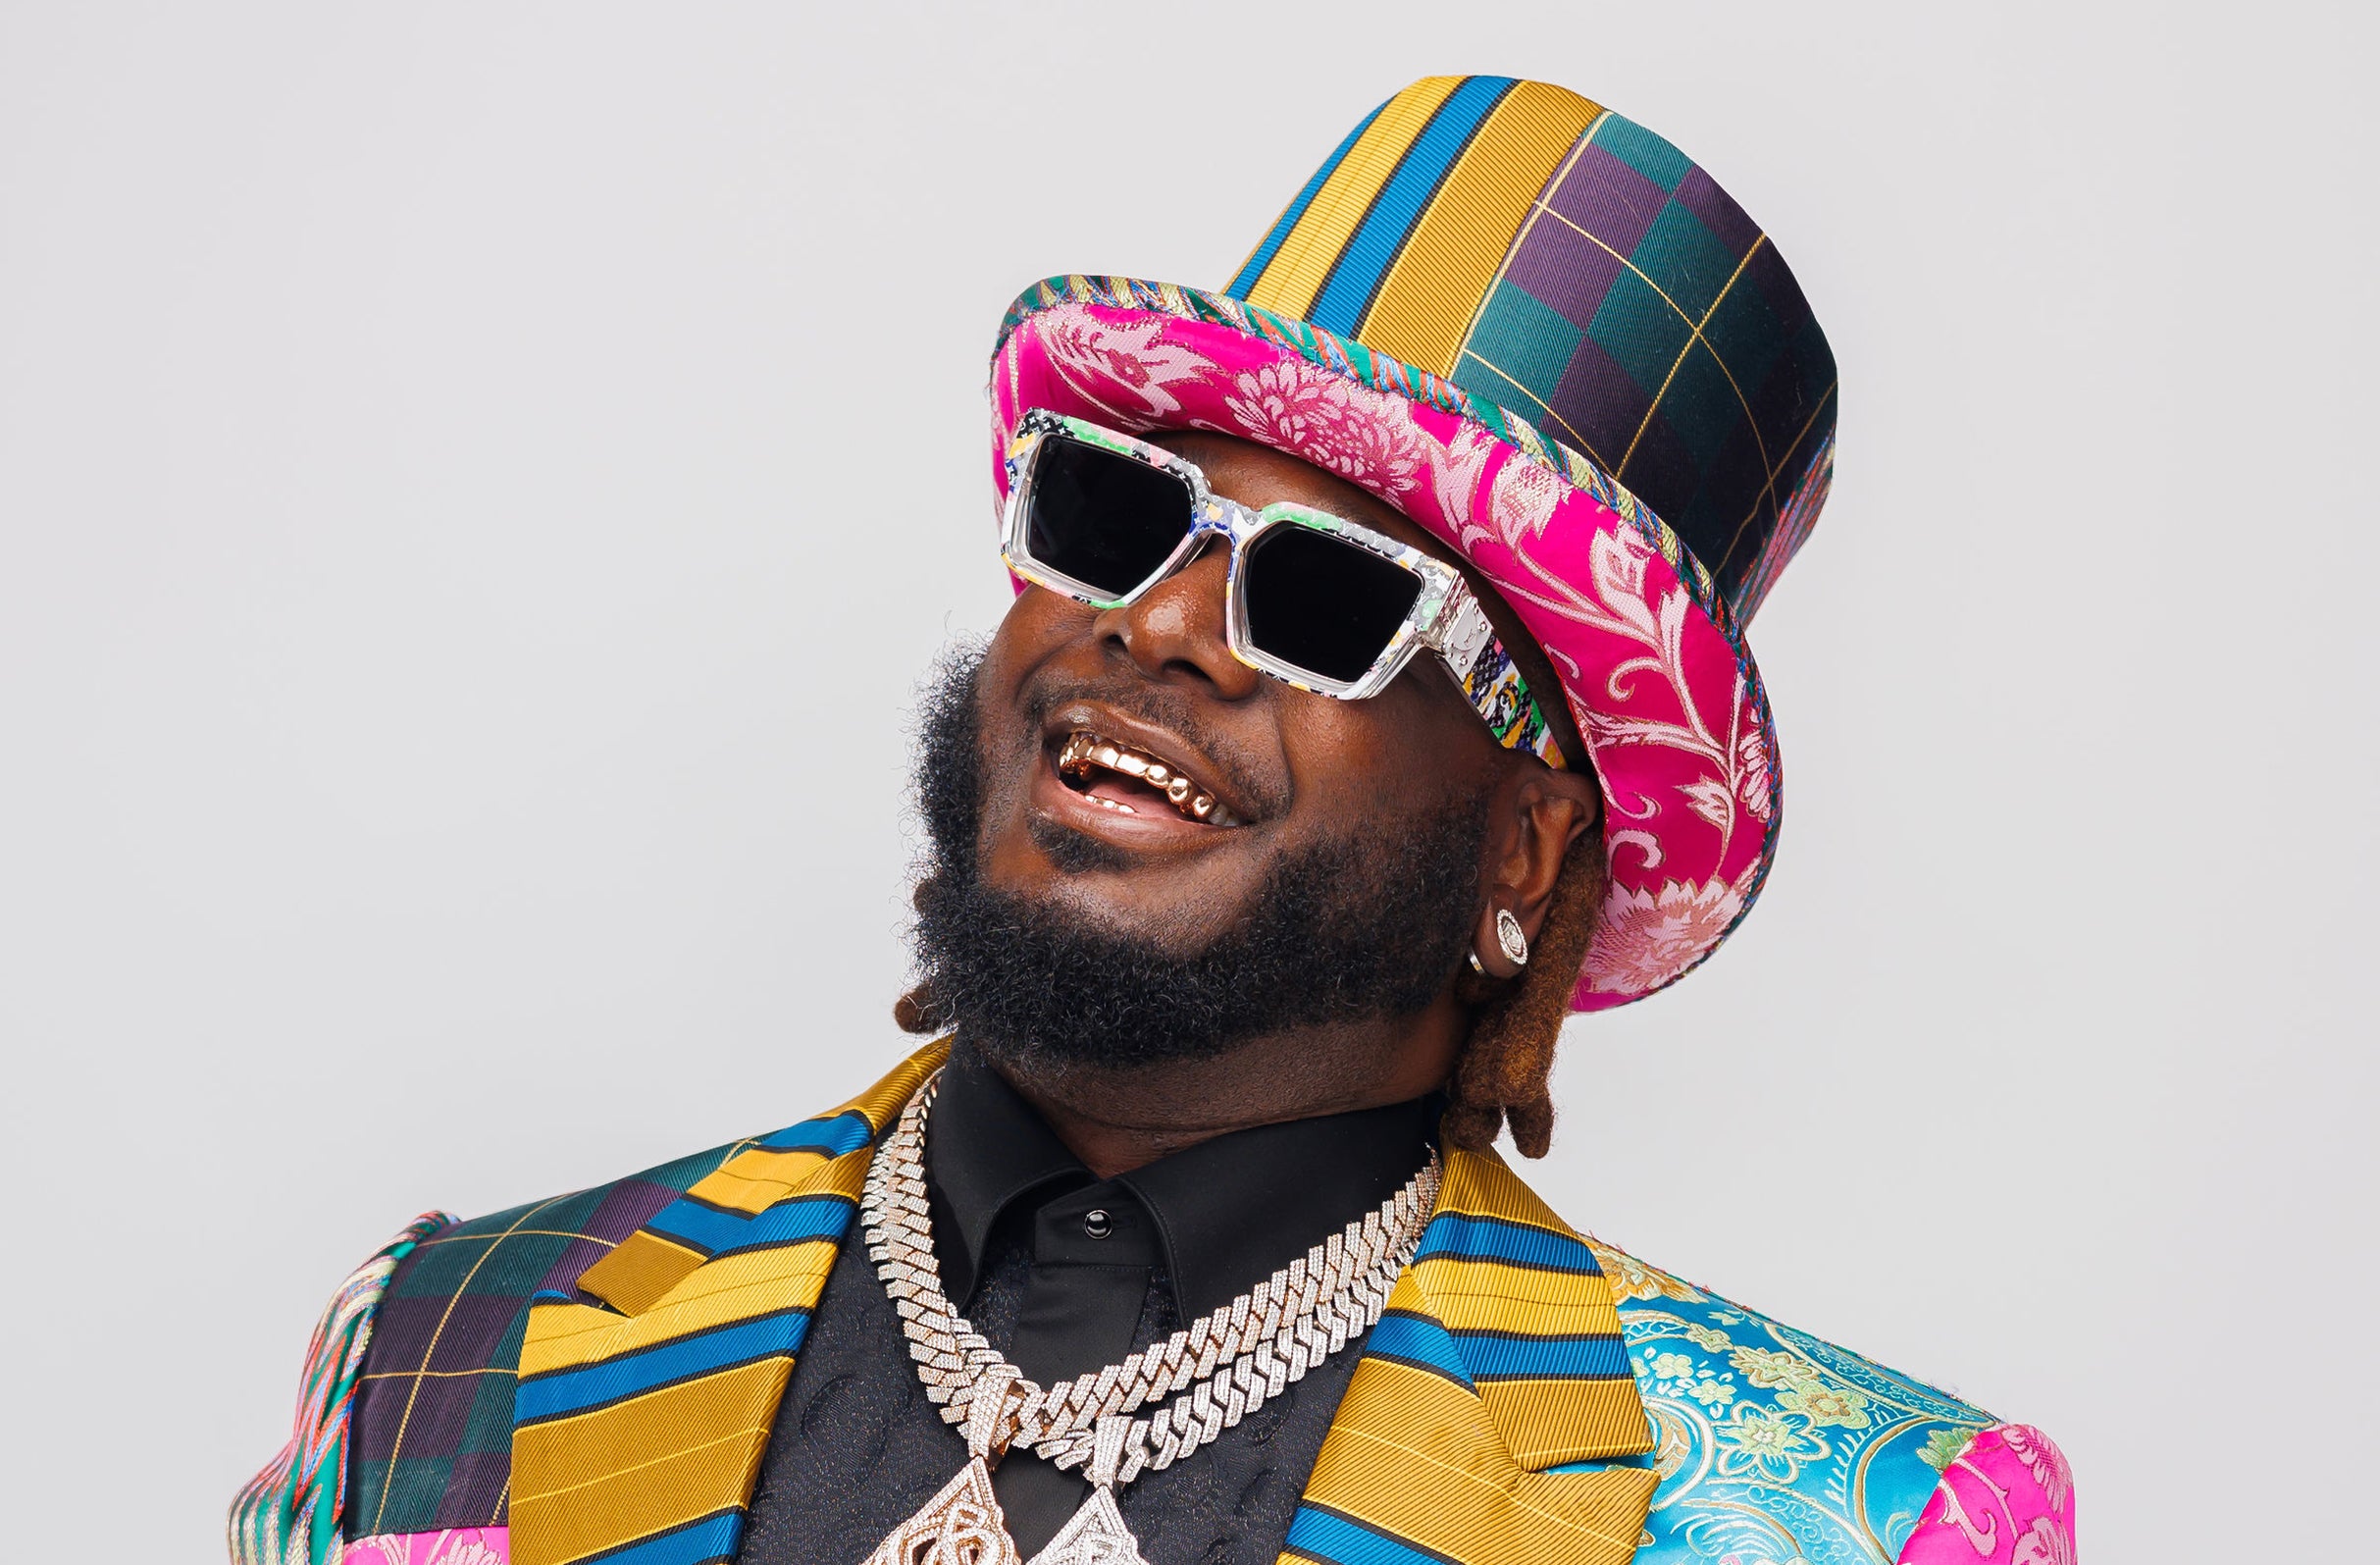 T-Pain's Mansion In Wiscansin Party pre-sale password